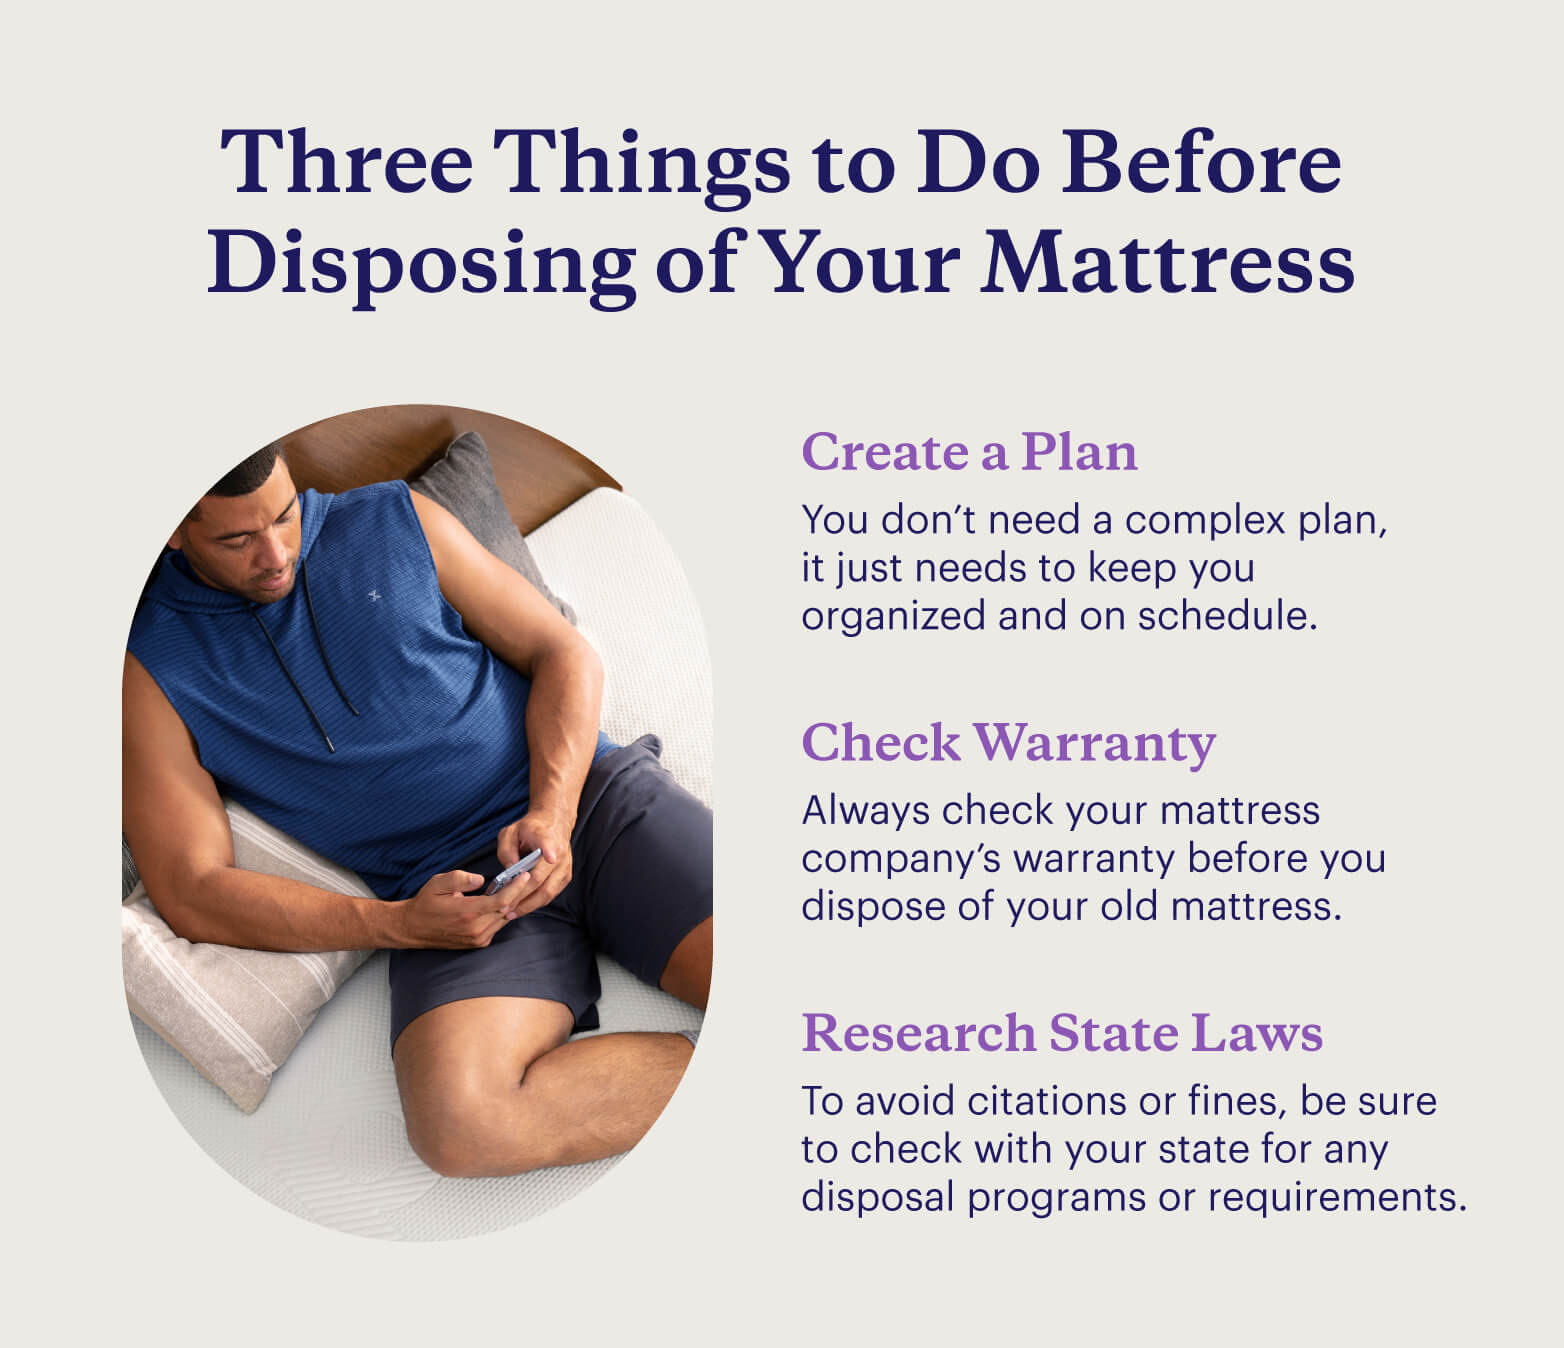 Before disposing a mattress, you should create a plan, check your warranty, and research your state laws.